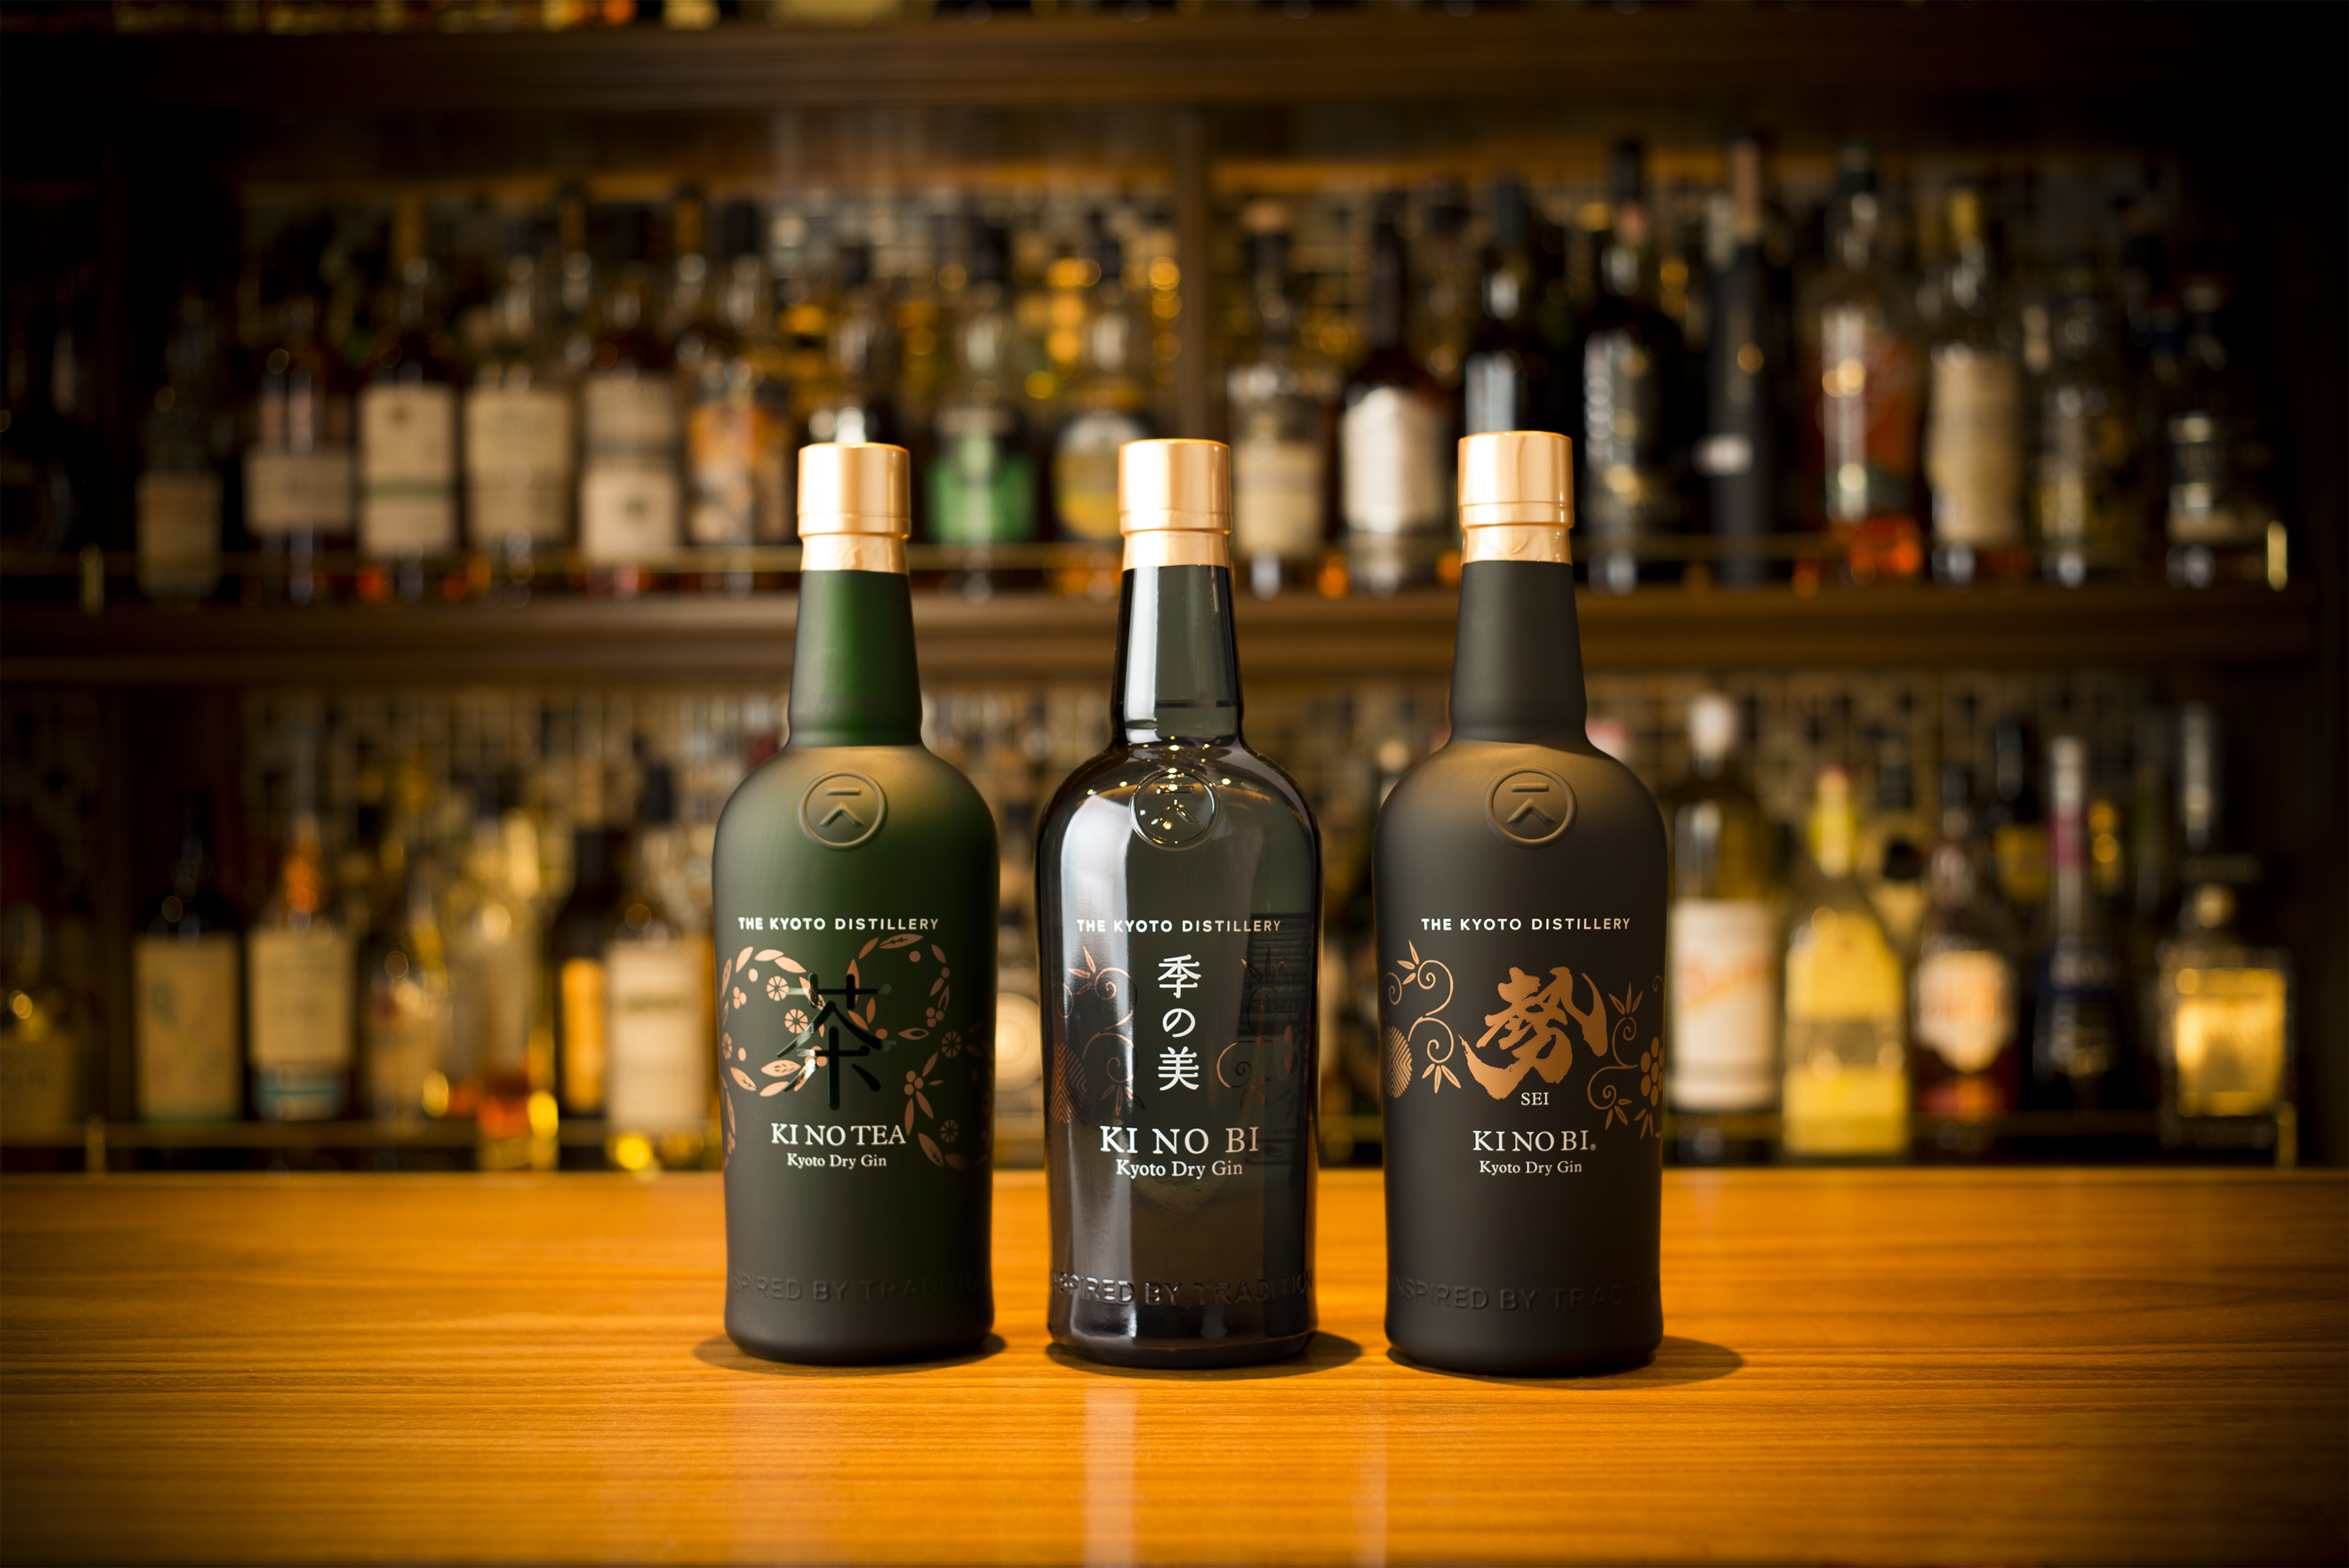 Kyoto Distillery produces three types of gin: Kin no Bi, Kin no Tea, which uses Kyoto tencha and gyokuro teas, and Ki no Sei, which until last year was also known as 